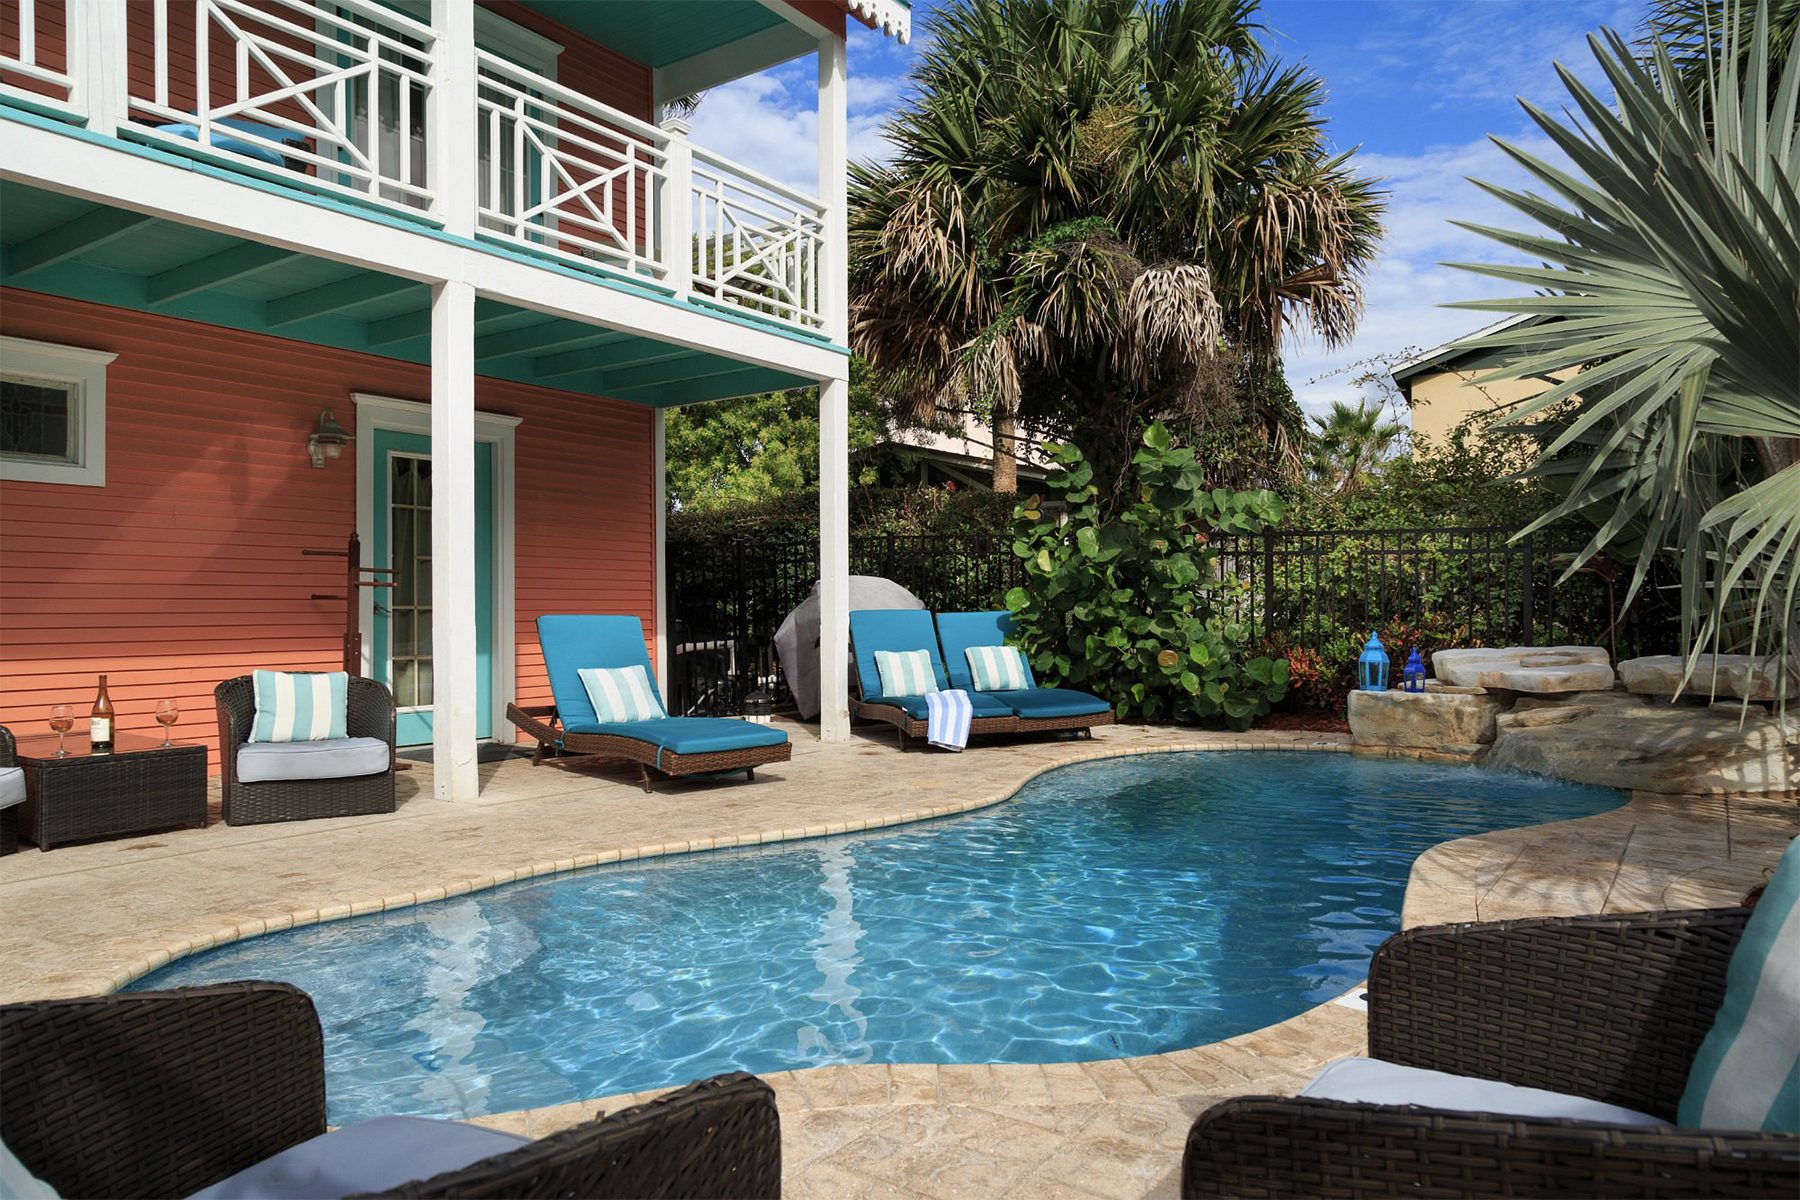 <h3 class=""><strong>St. Augustine,</strong> Florida</h3> <p class=""><strong>Best for: </strong>A romantic couples getaway in Florida</p> <p>The main building, located in <a href="https://www.rd.com/article/st-augustine-florida-oldest-city/" rel="noopener noreferrer">St. Augustine's historic district</a> and across the street from Mantanzas Bay, features 17 distinct rooms and suites with names like Napoleon, Princess Margaret and Marie Antoinette. Amenities may include soaking tubs, electric fireplaces, sitting areas, and water or Bridge of Lion views. There are seven pet-friendly accommodations, including the Burgess Suite, which is where I stayed with my husband and our pup.</p> <p>One of the features they added around the time of our visit a few years ago has remained in place: Guests receive text communications about breakfast and happy hour. They can place their orders via text and request where they'd like it delivered—to their room, on the patio or in the gazebo. They can also use texts to request ice, extra towels or other amenities.</p> <p>If you need larger accommodations, <a href="https://www.tripadvisor.com/Hotel_Review-g34599-d603280-Reviews-Bayfront_Marin_House-St_Augustine_Florida.html" rel="noopener">the property</a> offers several rentals in downtown, including two one-bedroom suites, an apartment with a full kitchen and a house. All the downtown options include a hot breakfast delivered each morning; an invitation to the evening happy hour at the main location; free parking; and complimentary use of bicycles, beach chairs and umbrellas.</p> <p><strong>Pros:</strong></p> <ul> <li class="">Very pet-friendly</li> <li class="">Waterfront location</li> <li class="">Children are welcome</li> <li class="">Popular for destination weddings and honeymoons</li> </ul> <p><strong>Cons: </strong></p> <ul> <li class="">Free parking is two blocks away from the main building</li> <li class="">There is an additional $35 fee per day for children 16 and older, and a $20 charge per day for children ages 3 to 15</li> </ul> <p class="listicle-page__cta-button-shop"><a class="shop-btn" href="https://www.tripadvisor.com/Hotel_Review-g34599-d603280-Reviews-Bayfront_Marin_House-St_Augustine_Florida.html">Book Now</a></p>